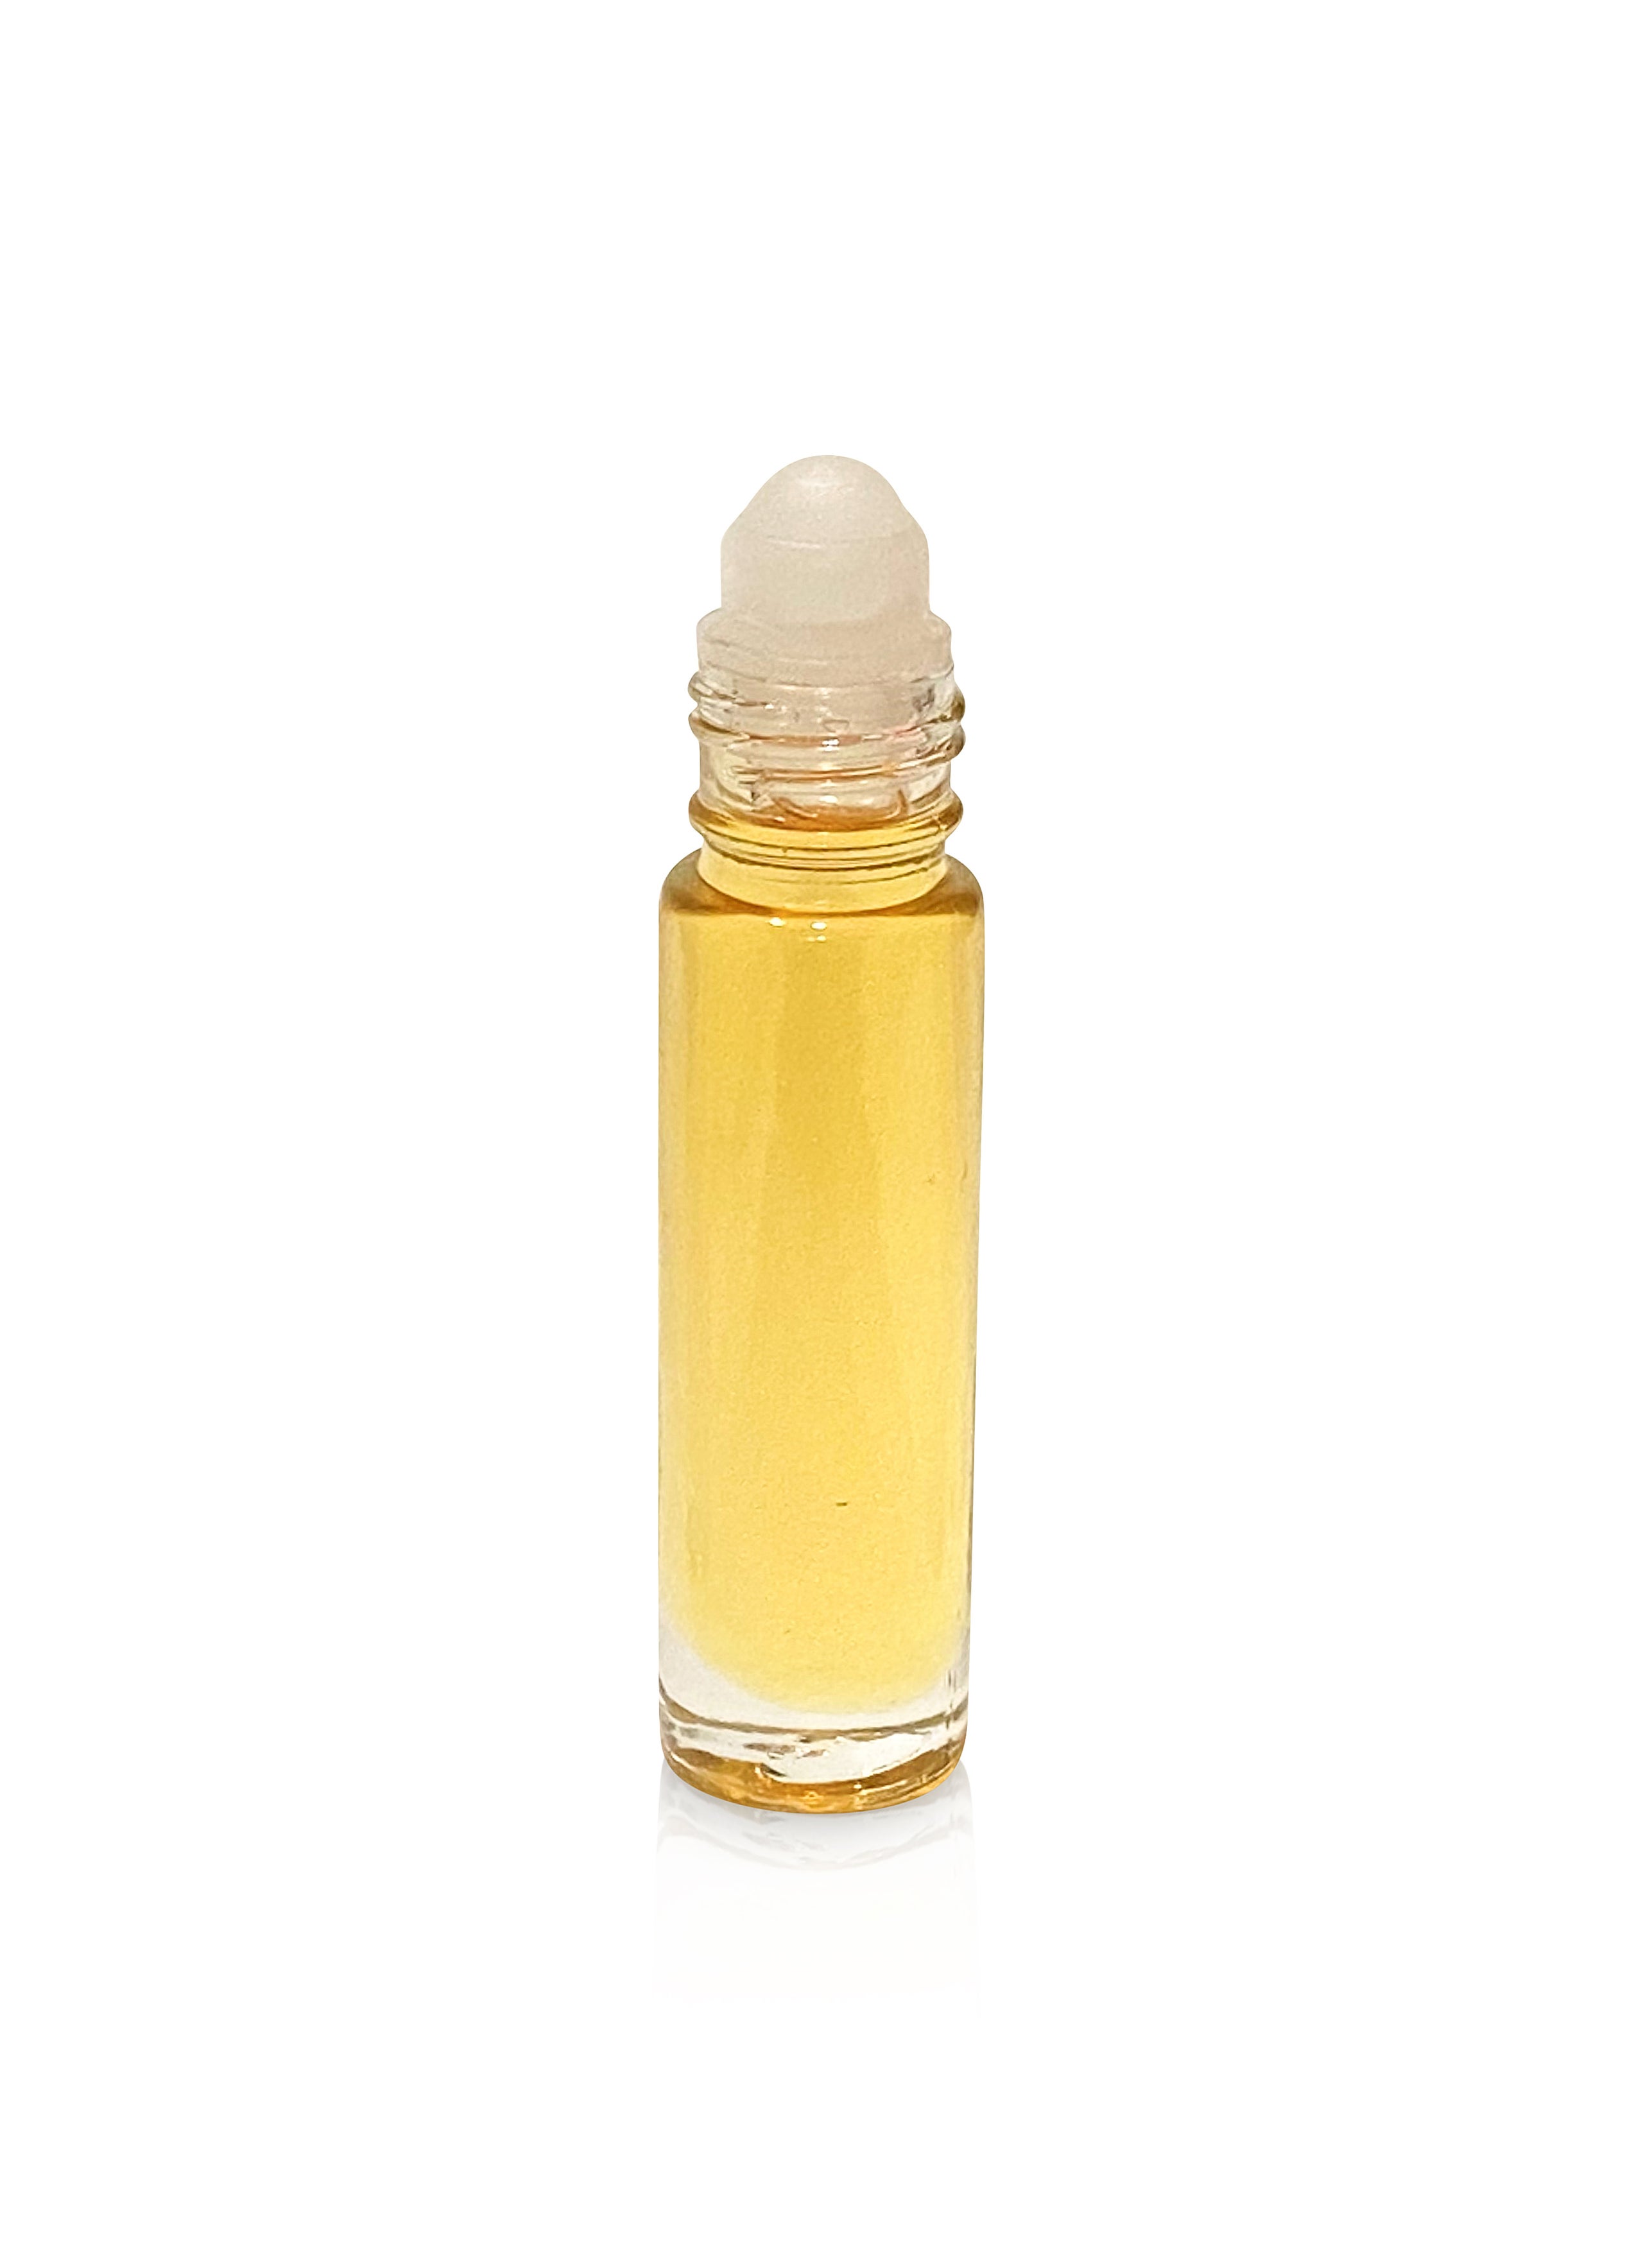 Baby Powder Fragrance Body Oil Exquisite and Fantastic Aroma, With